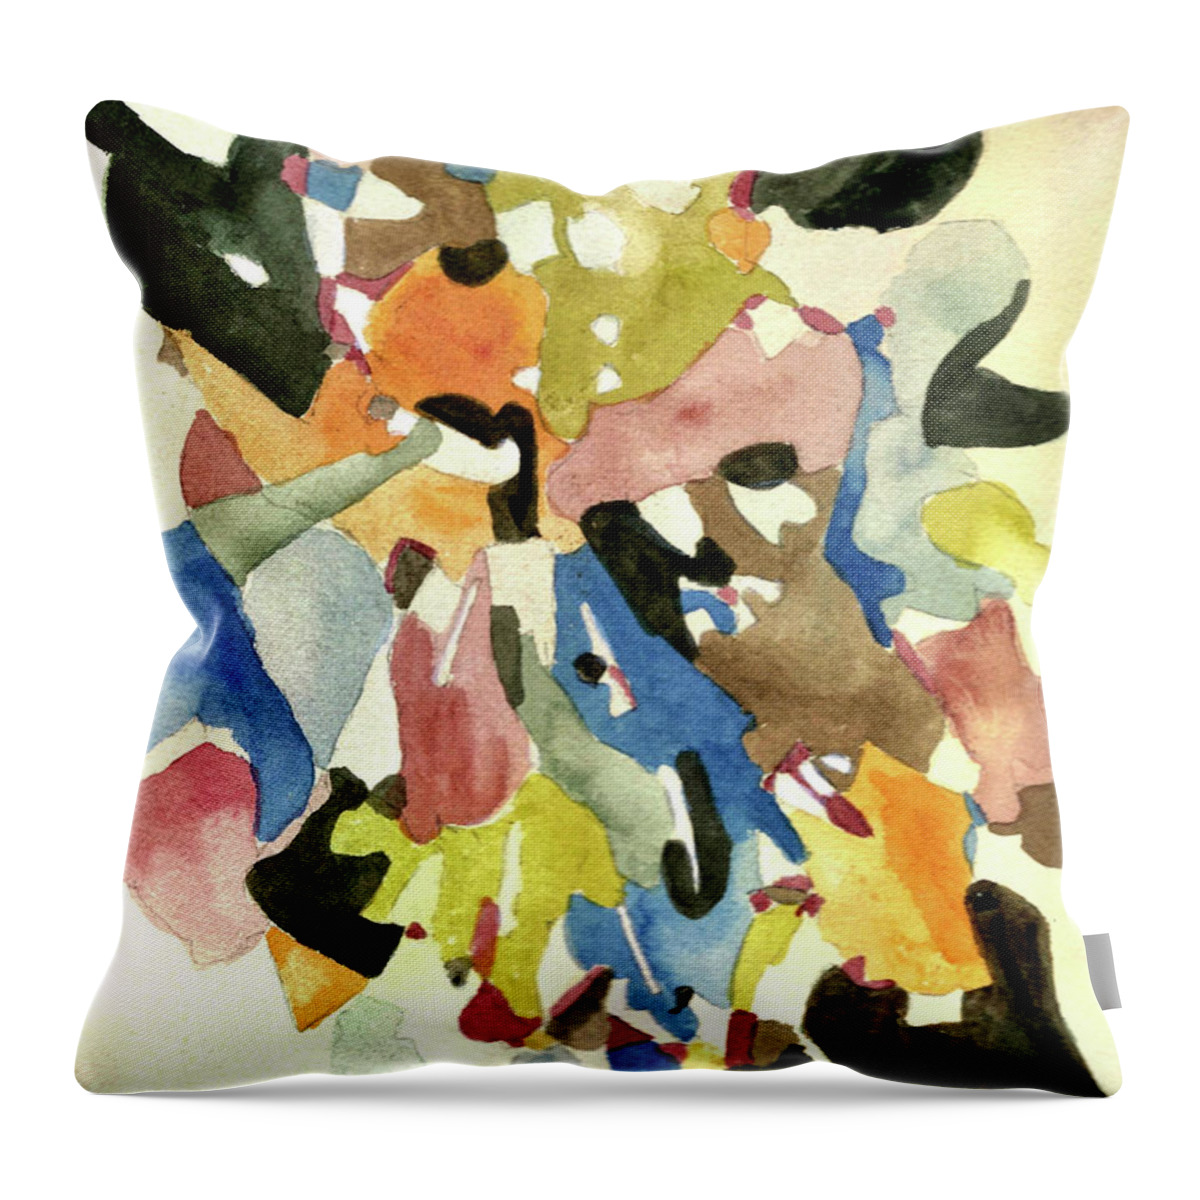 Masquerade Ball Throw Pillow featuring the painting Masquerade Ball by L A Feldstein